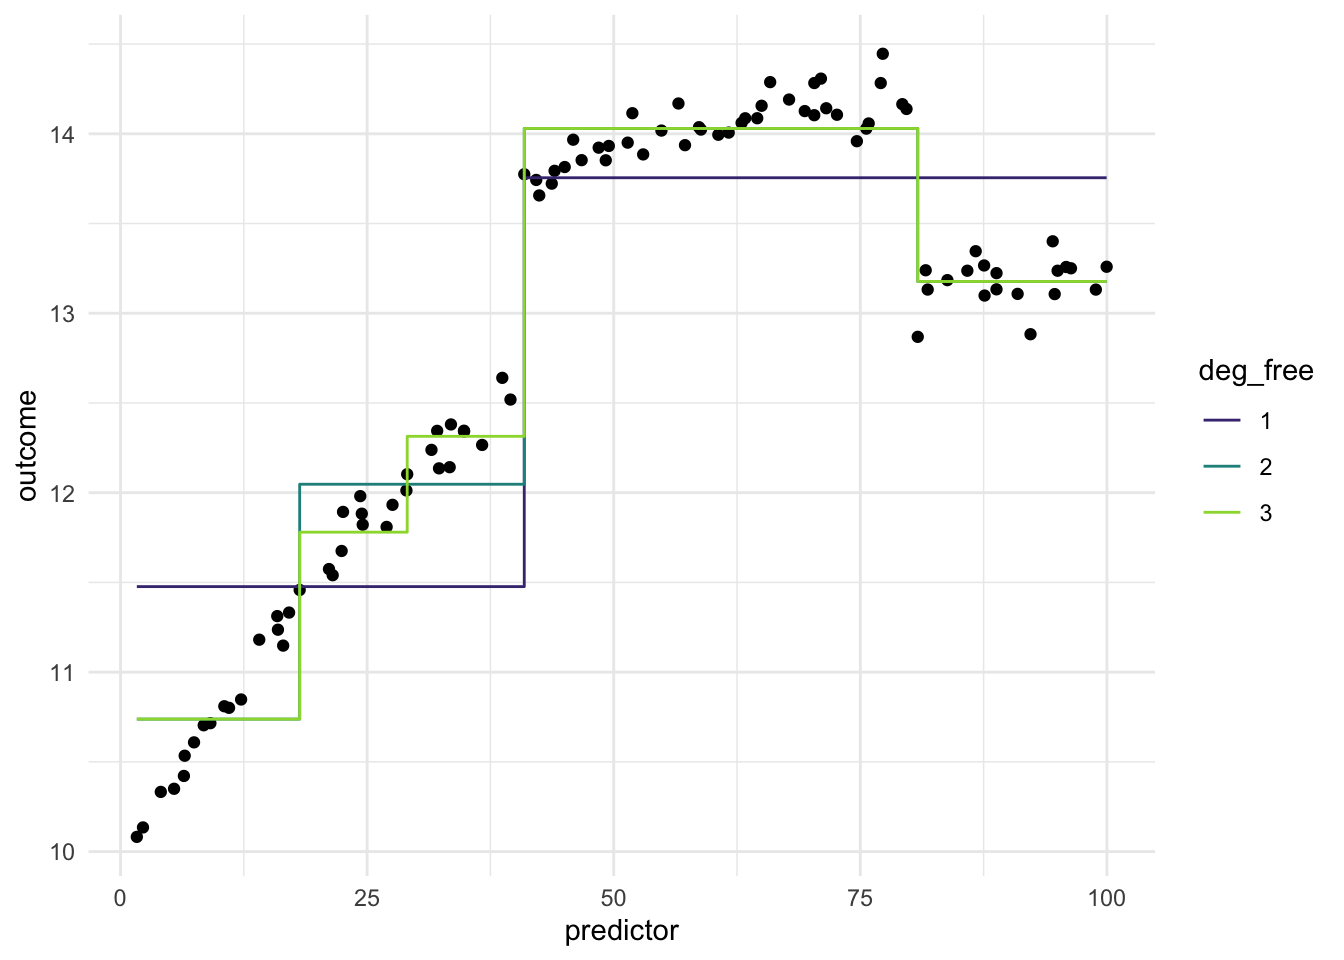 Scatter chart. Predictor along the x-axis and outcome along the y-axis. The data has some wiggliness to it with two big breaks in the curve. The functions now correctly split the data at the breaks in the data.